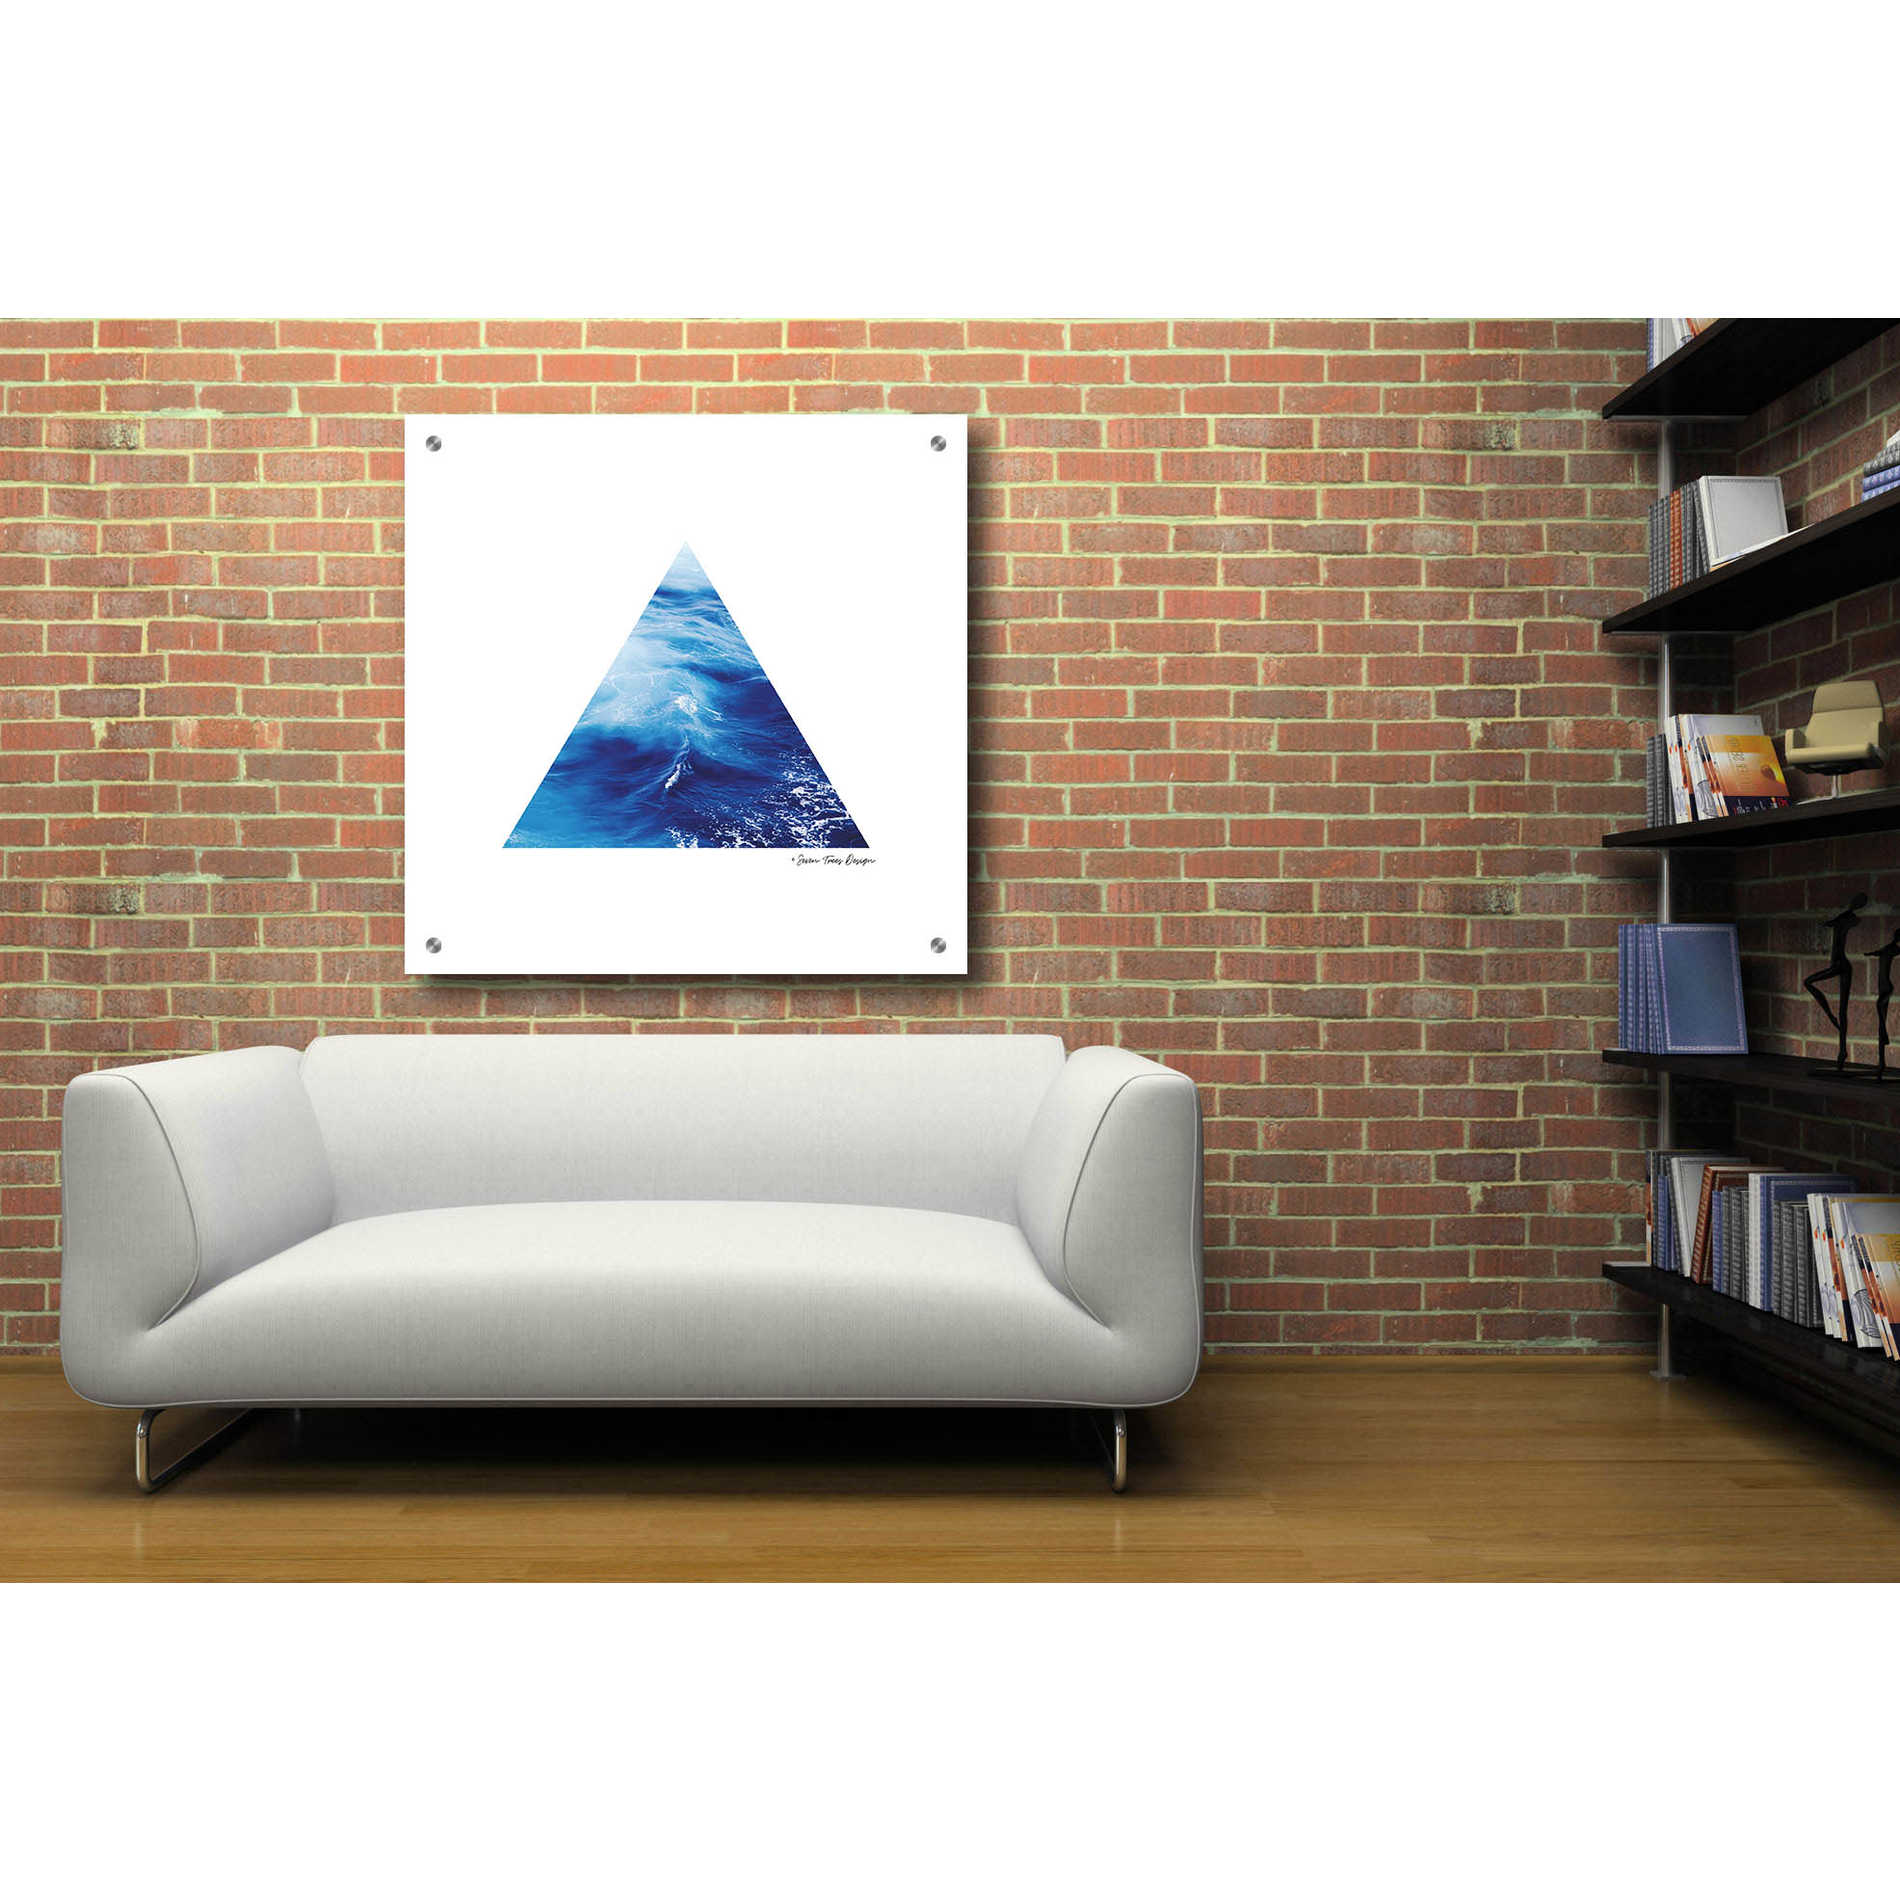 Epic Art 'Ocean Triangle' by Seven Trees Design, Acrylic Glass Wall Art,36x36